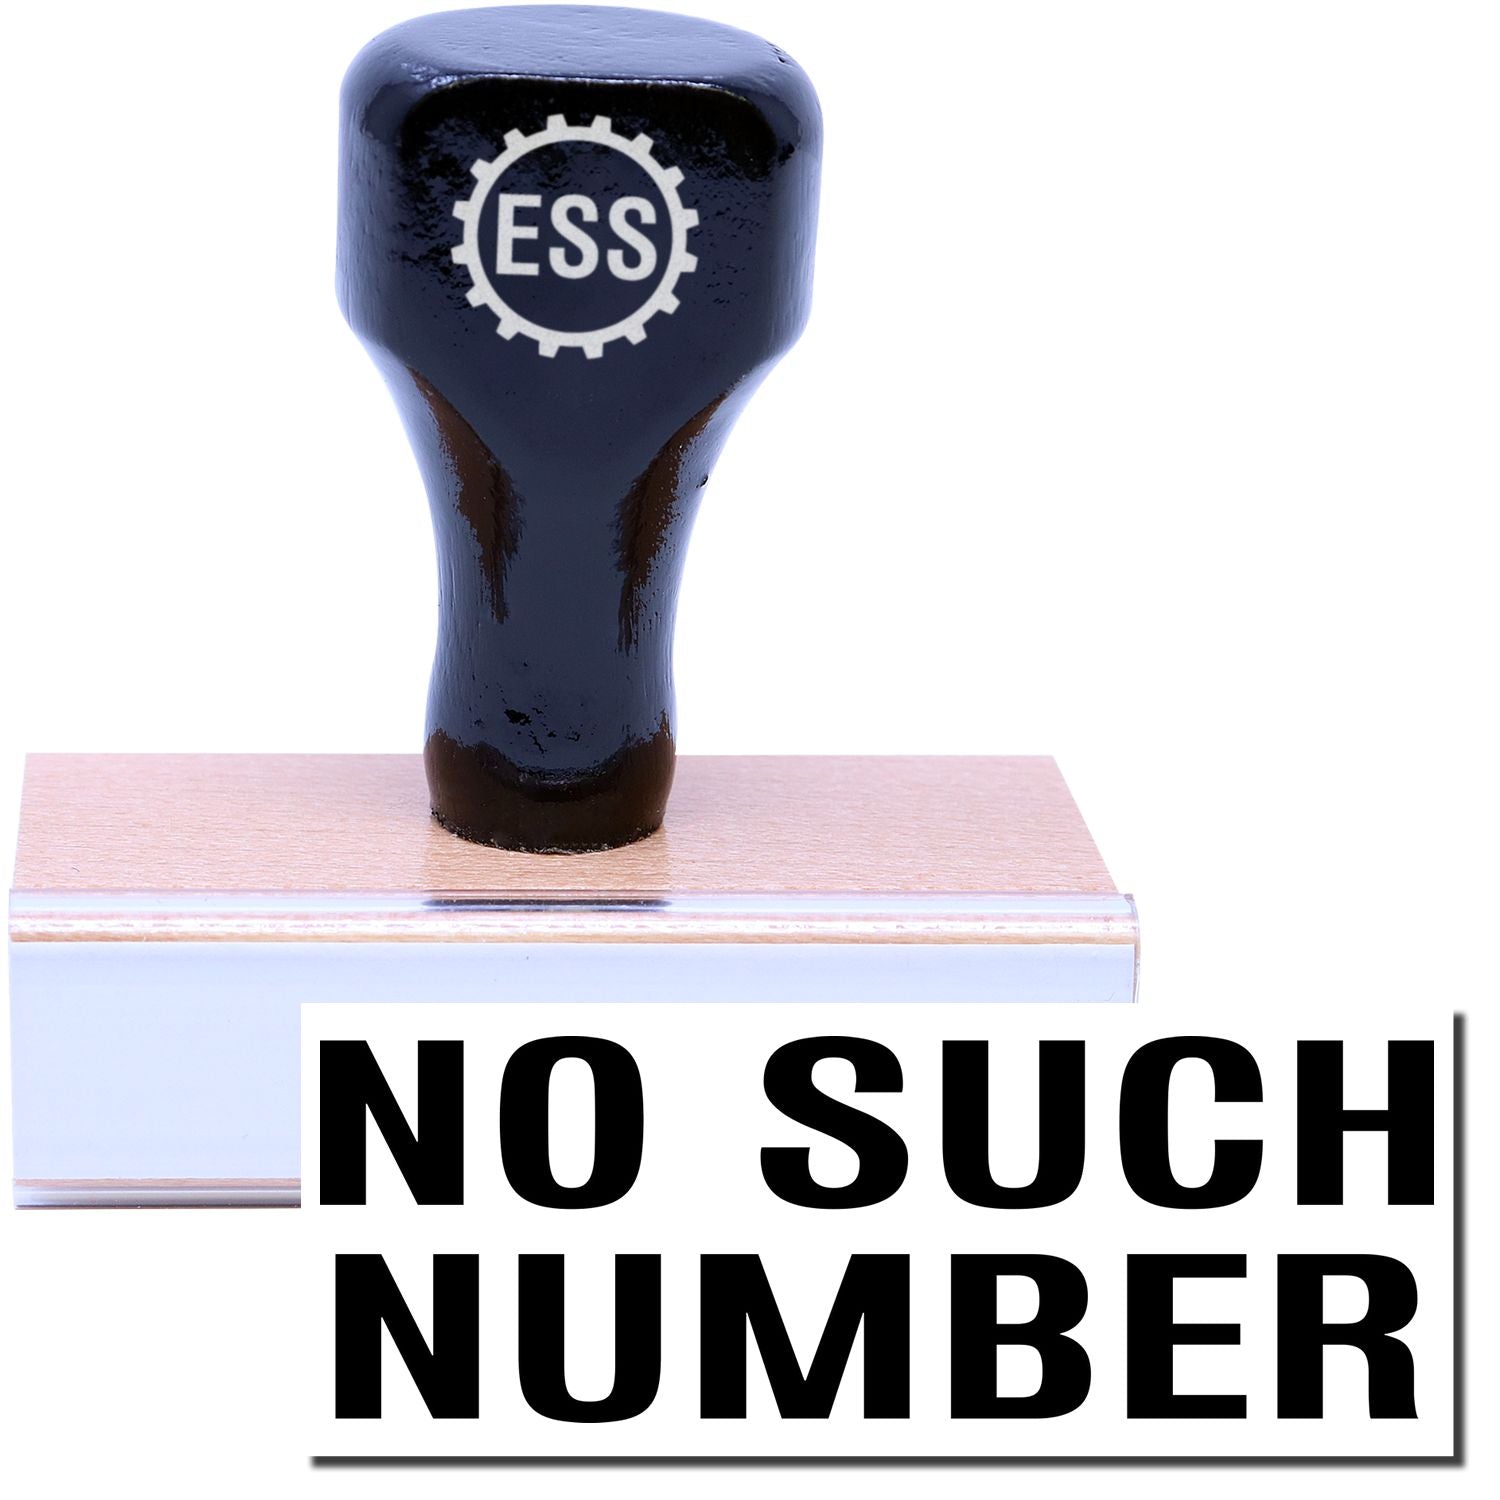 A stock office rubber stamp with a stamped image showing how the text "NO SUCH NUMBER" is displayed after stamping.